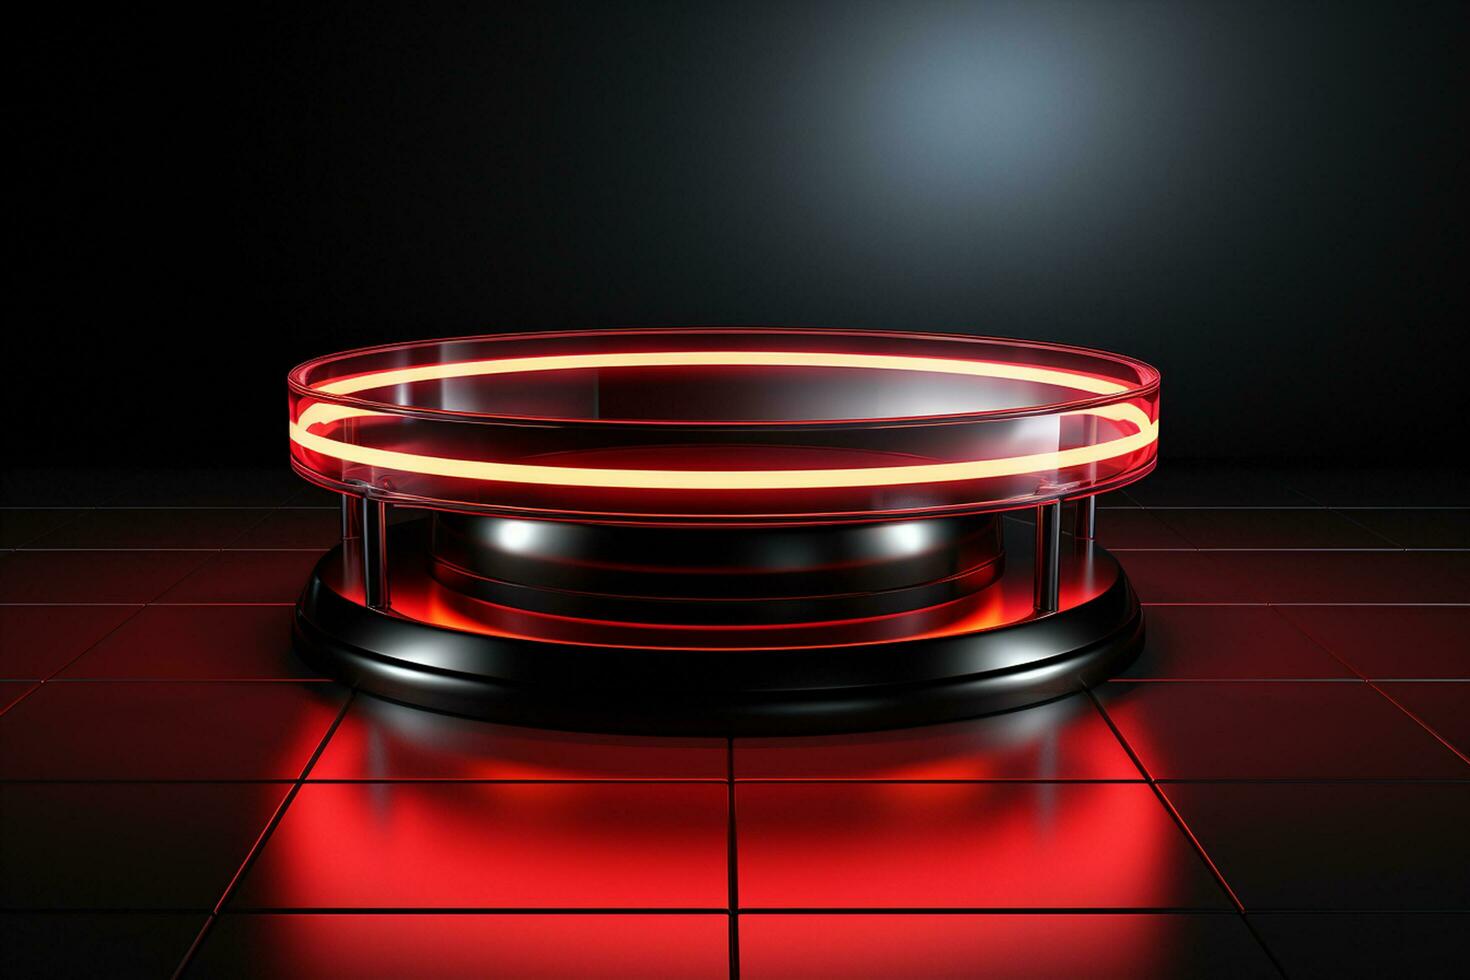 Ai Generated photo red light round podium and black background for mock up realistic image